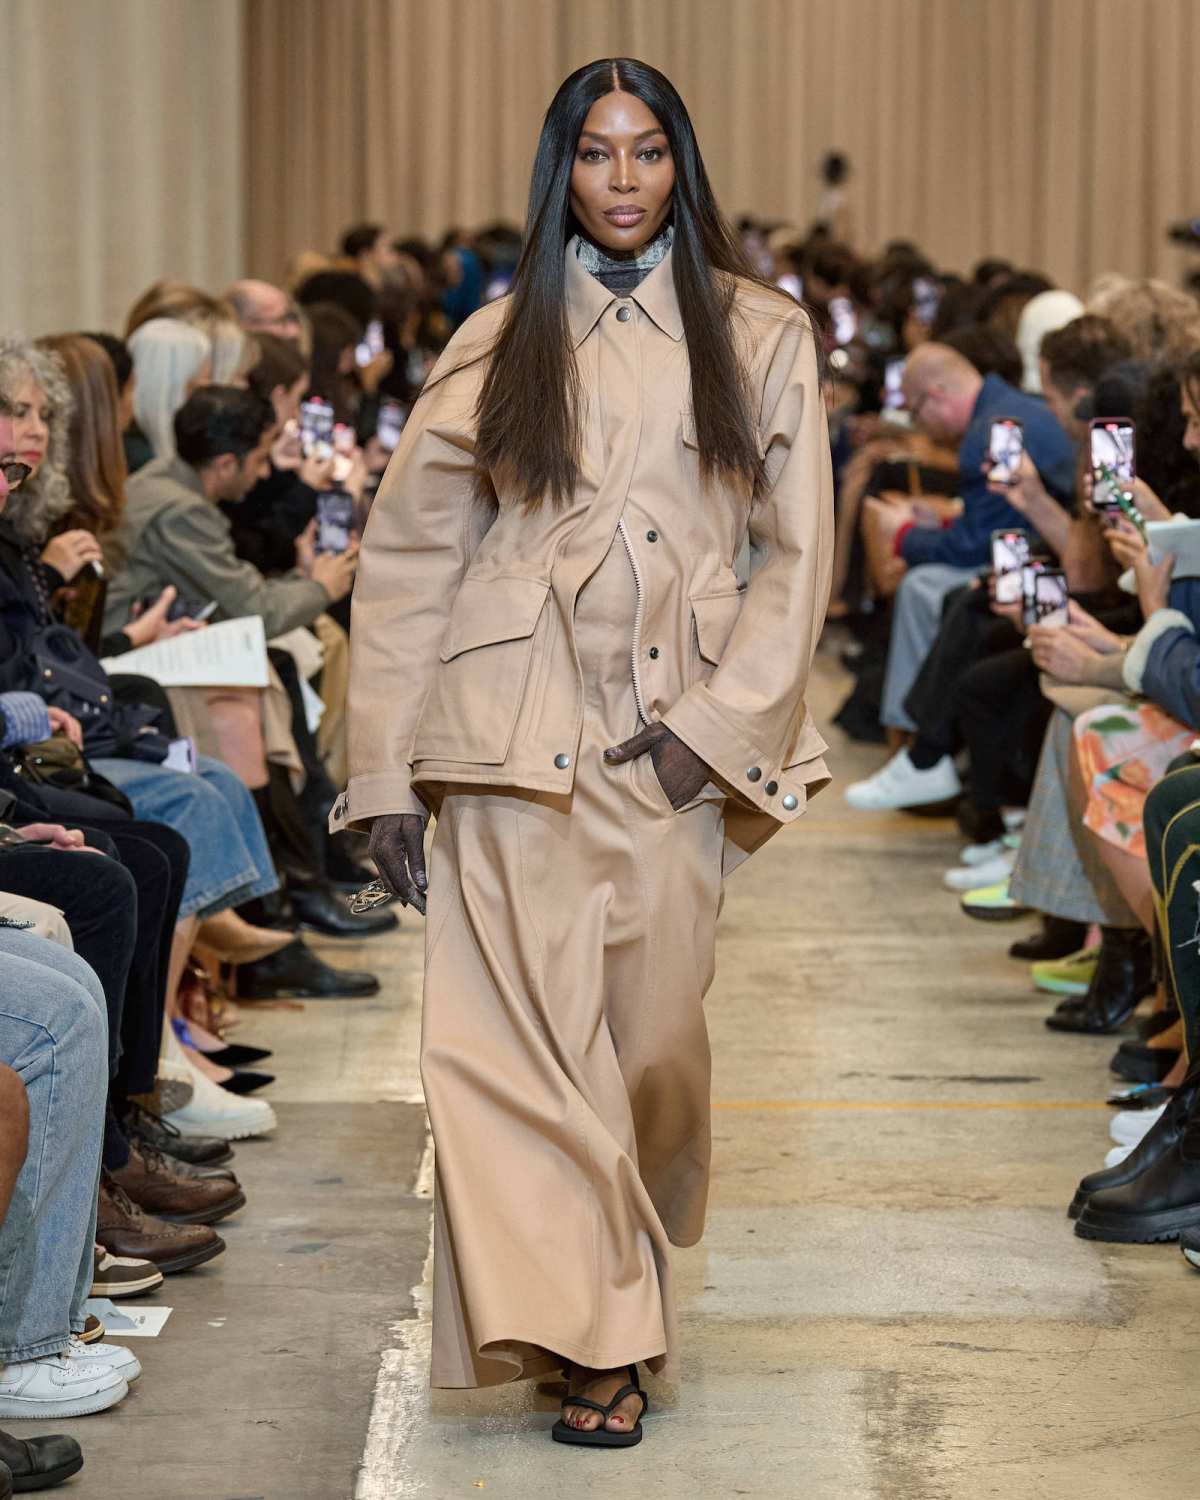 Blame Reserve headache Burberry Spring 2023 Show: Kanye West and More Attend